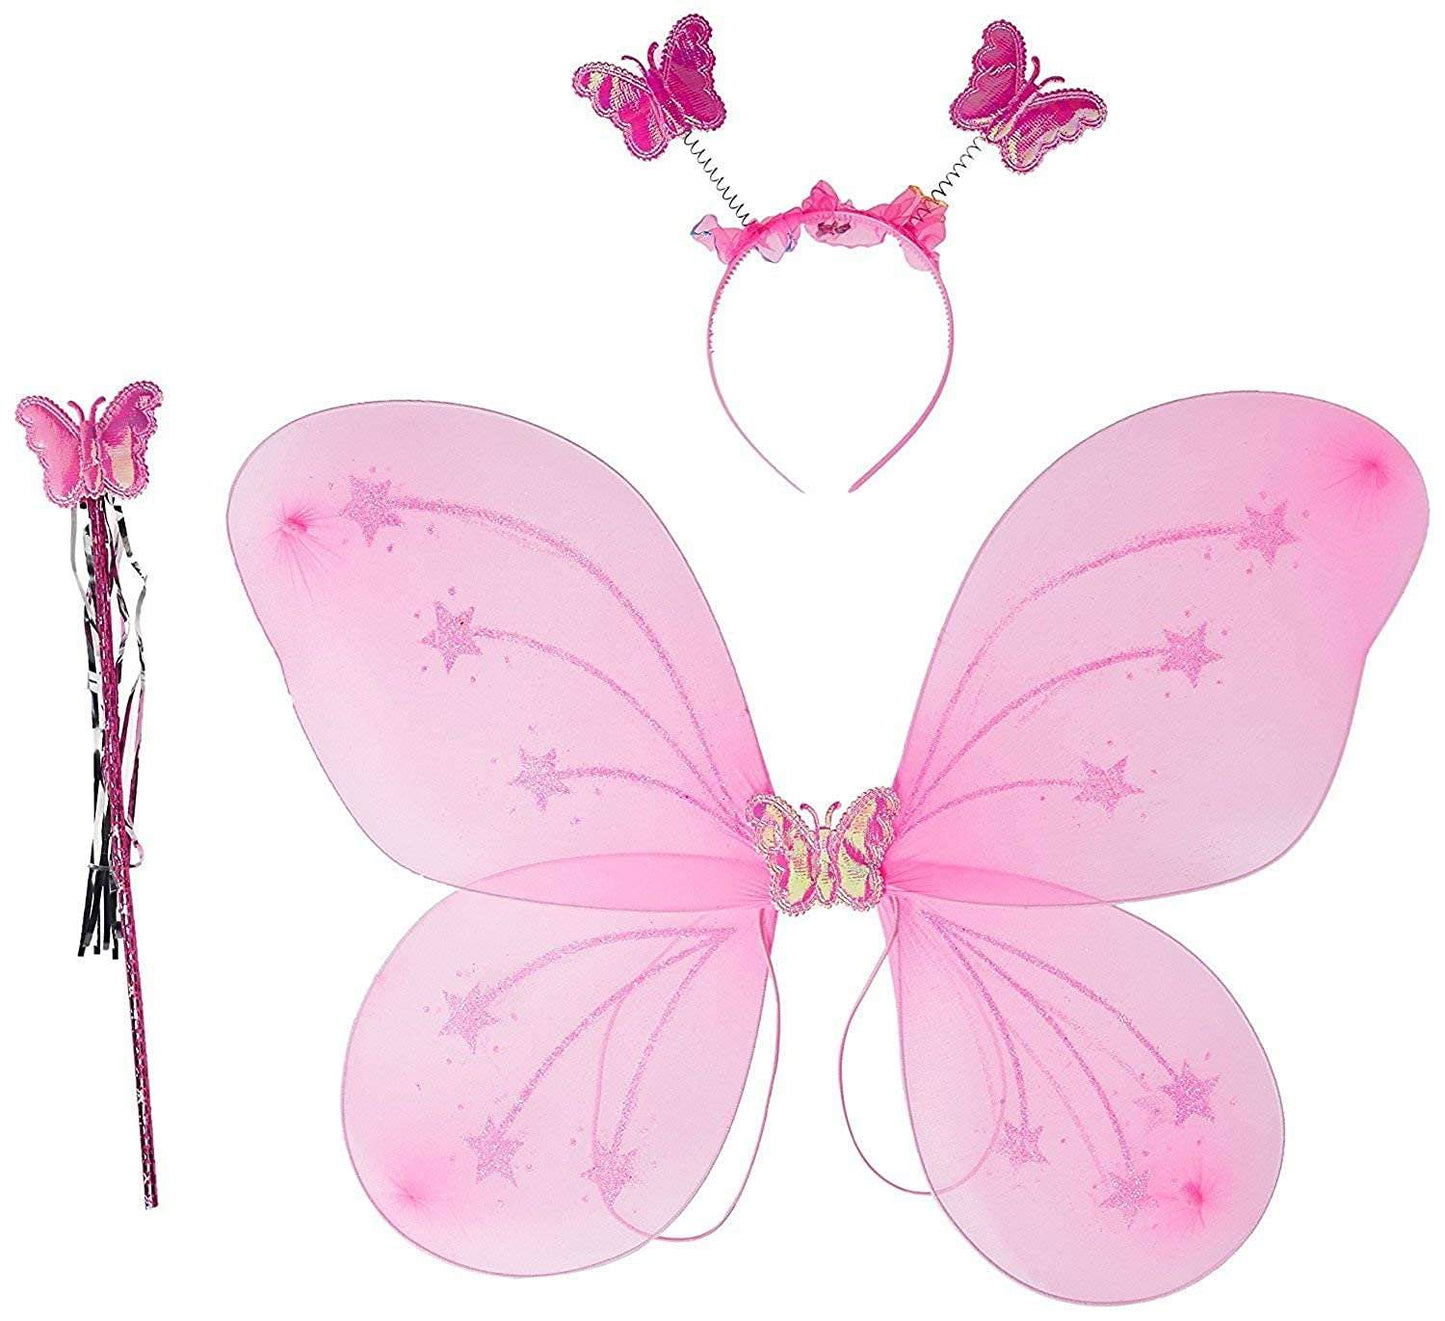 AZi® Fairy Butterfly Wings Costume Complete Set (Wings, Hairband, Stick) for Girls Kids Fancy Dress Costume | Pack of 1